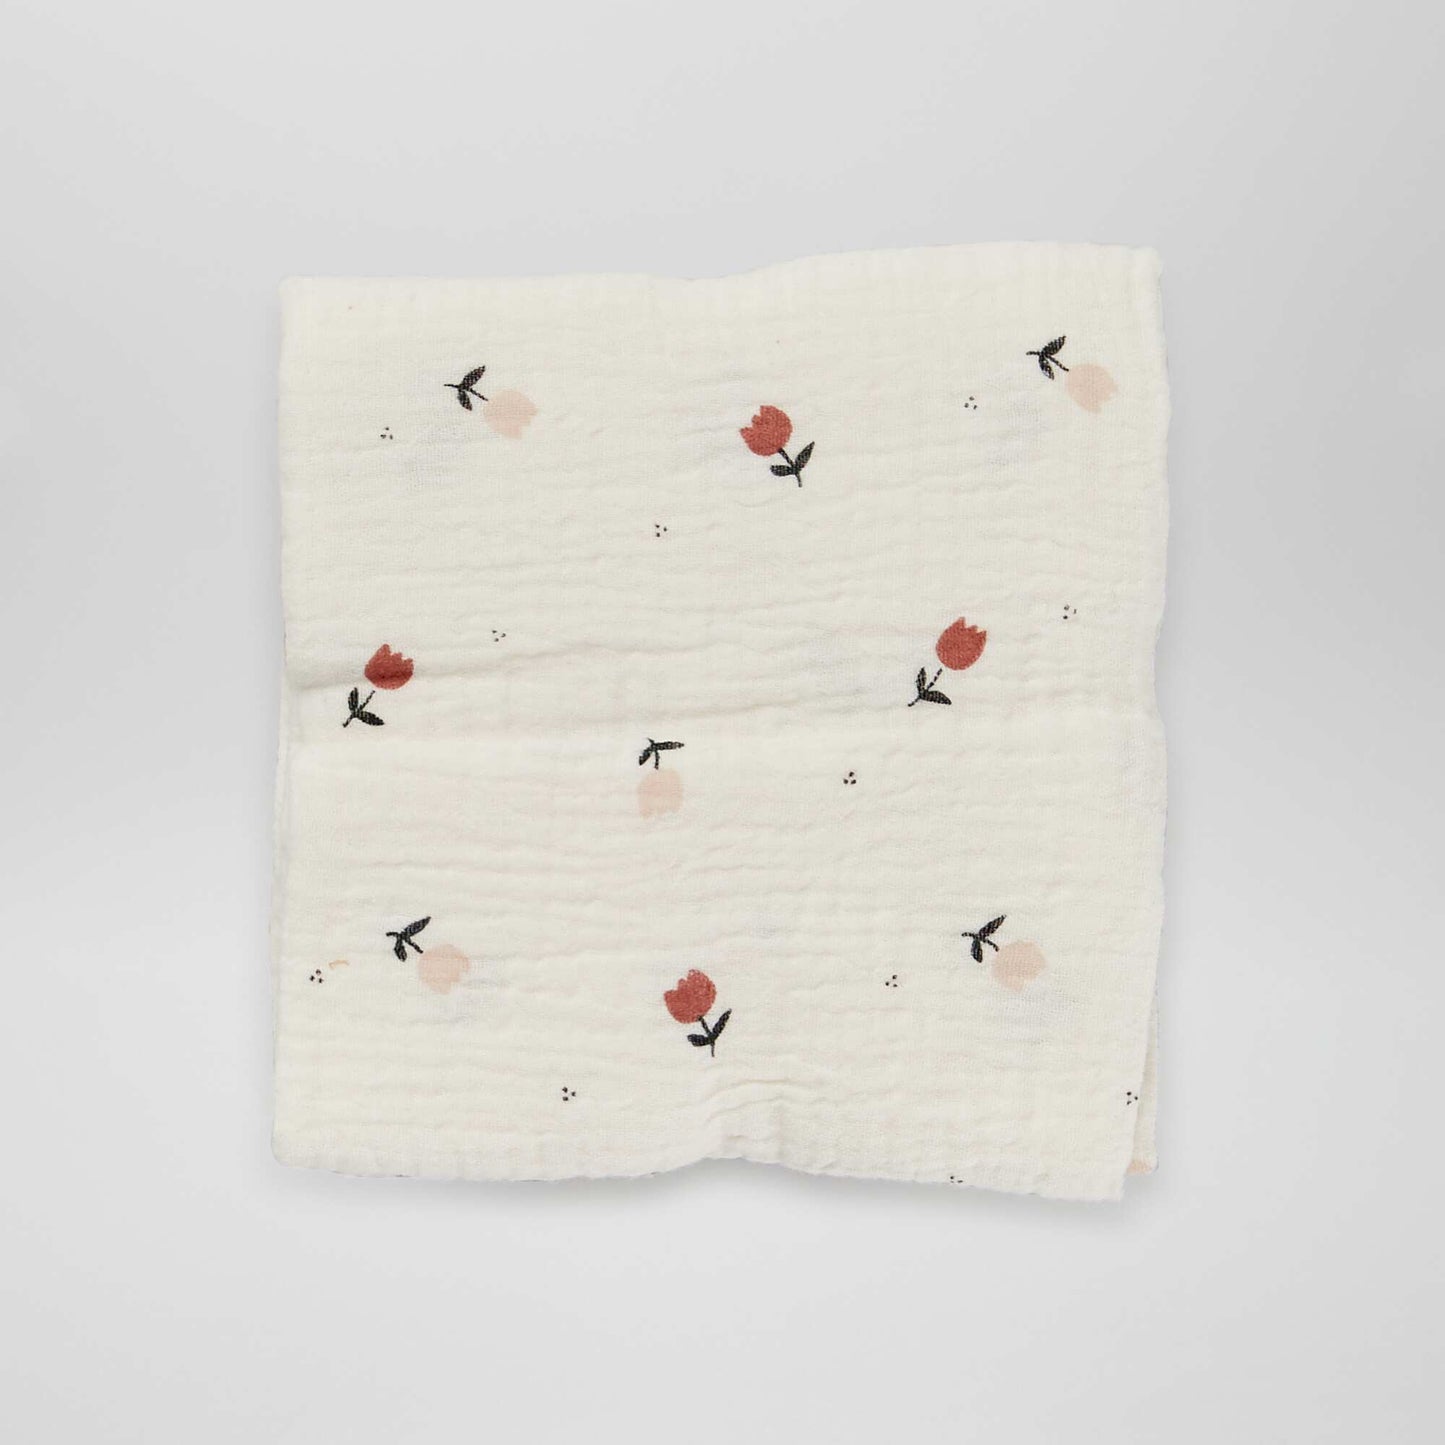 Pack of 3 cotton gauze squares WHITE